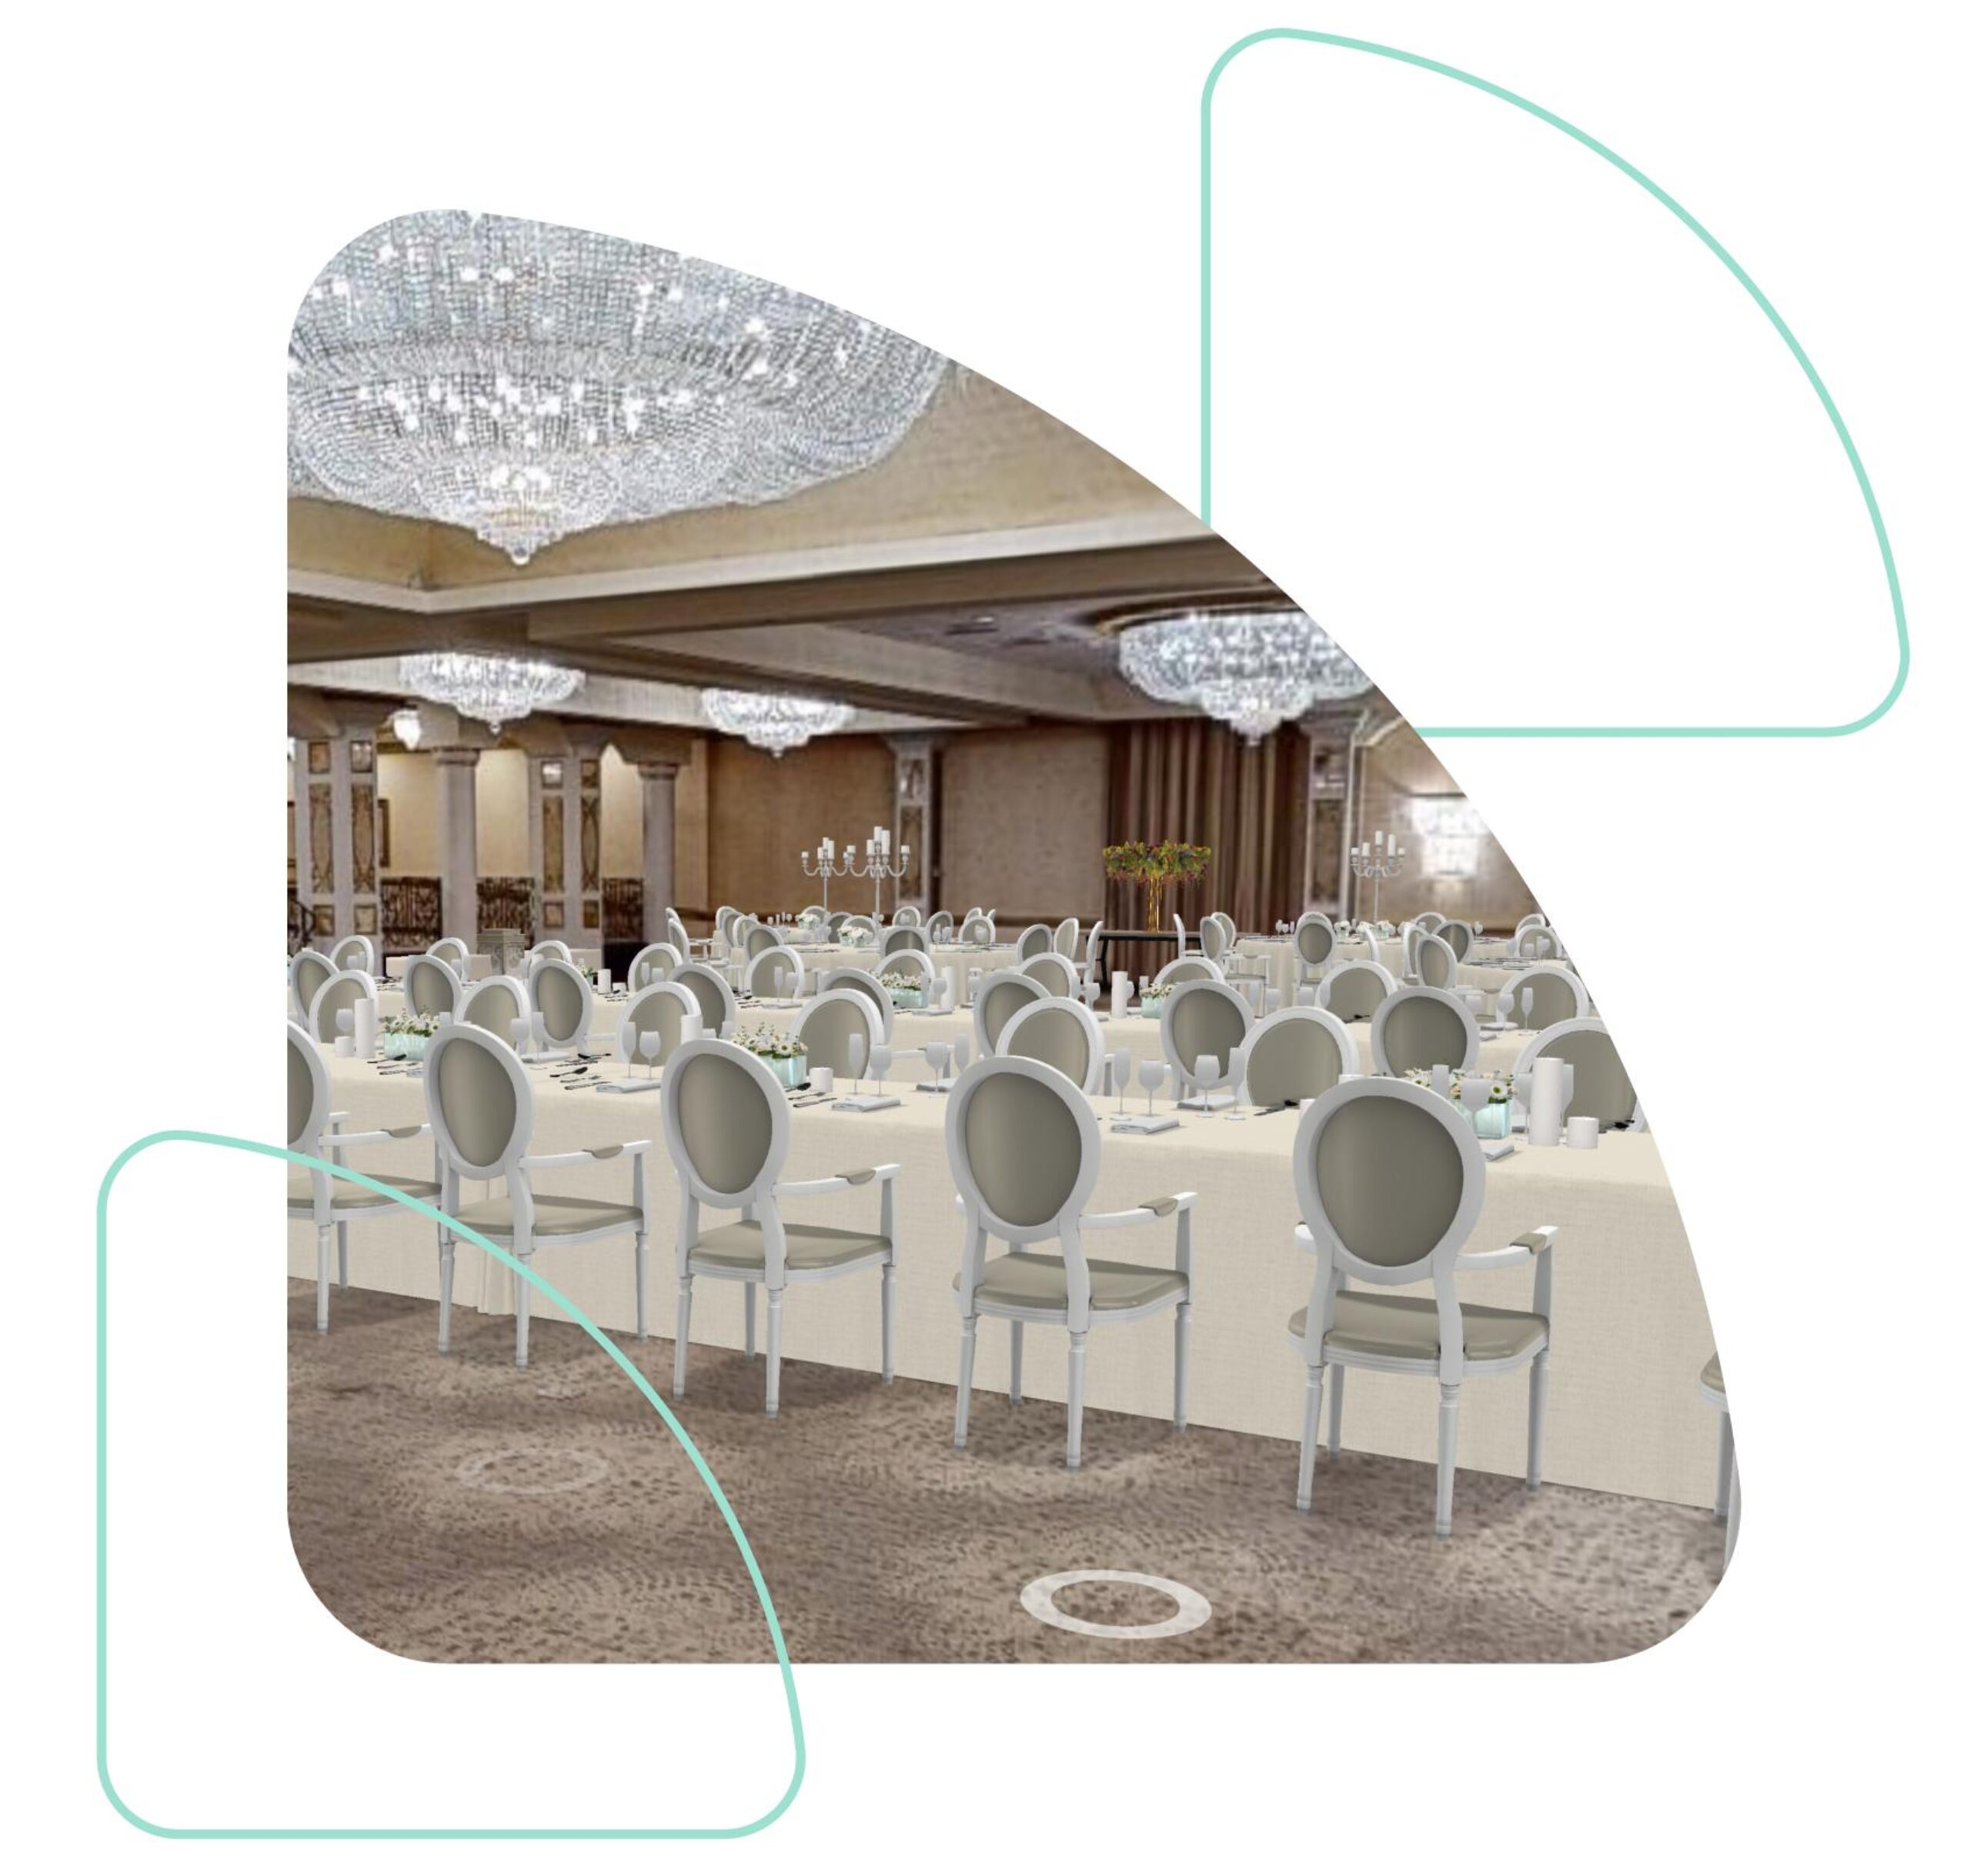 Several chairs are arranged around a table in a banquet hall. The 3D rendered chairs and tables represent how Prismm can help solve spatial design problems for event planners and venues.